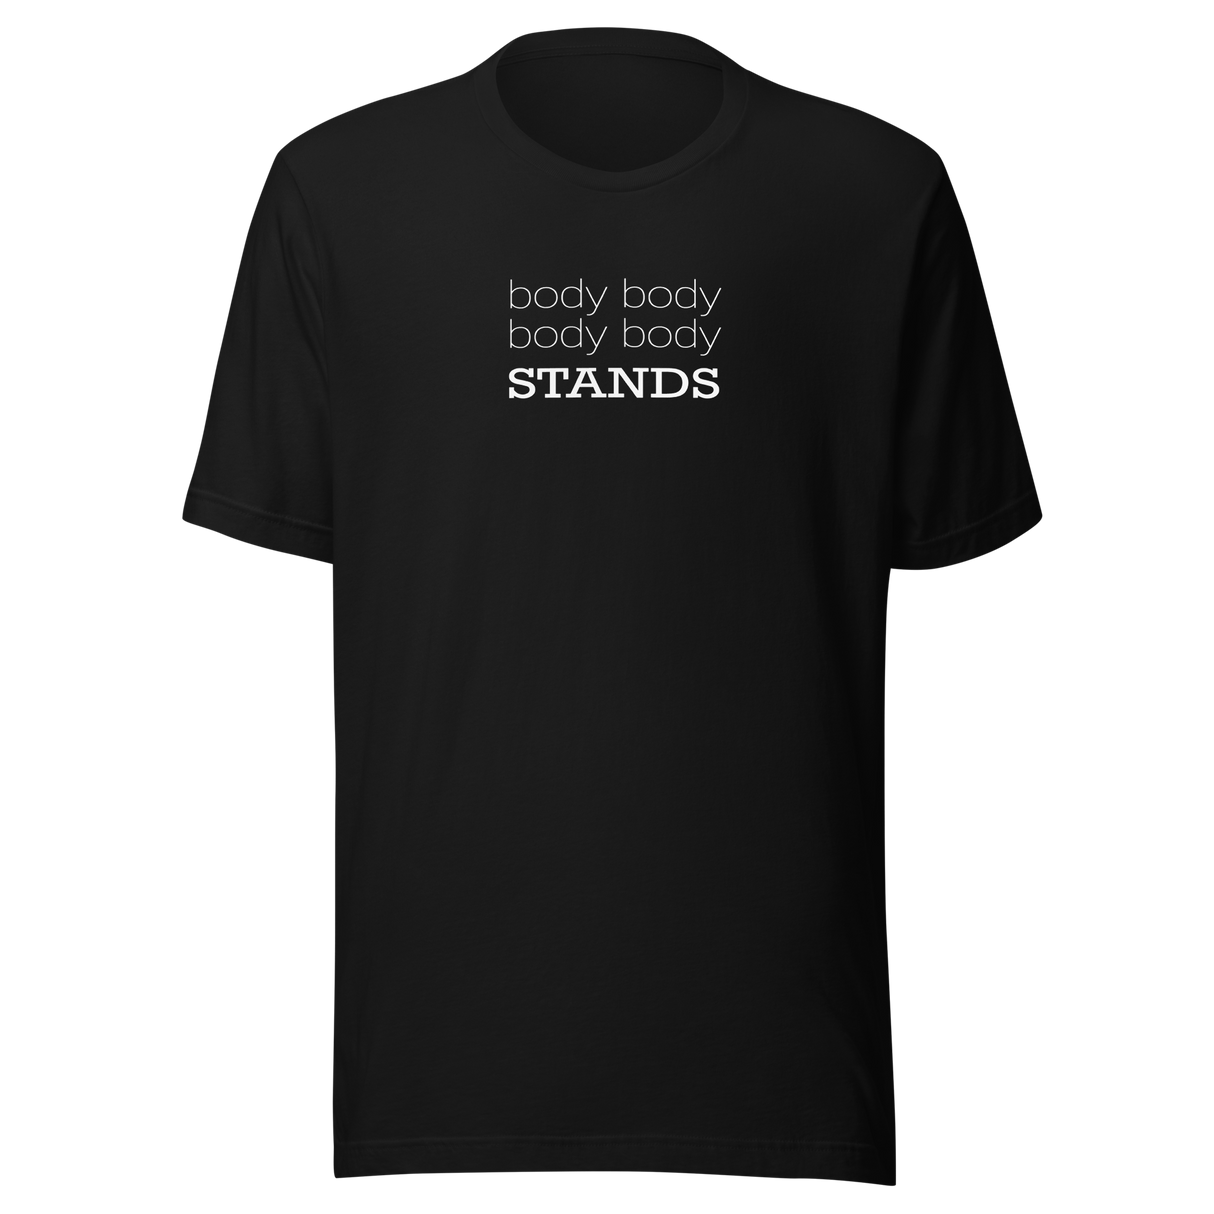 body-body-body-body-understands-philosophy-tee-funny-t-shirt-cool-tee-funny-t-shirt-mind-games-tee#color_black